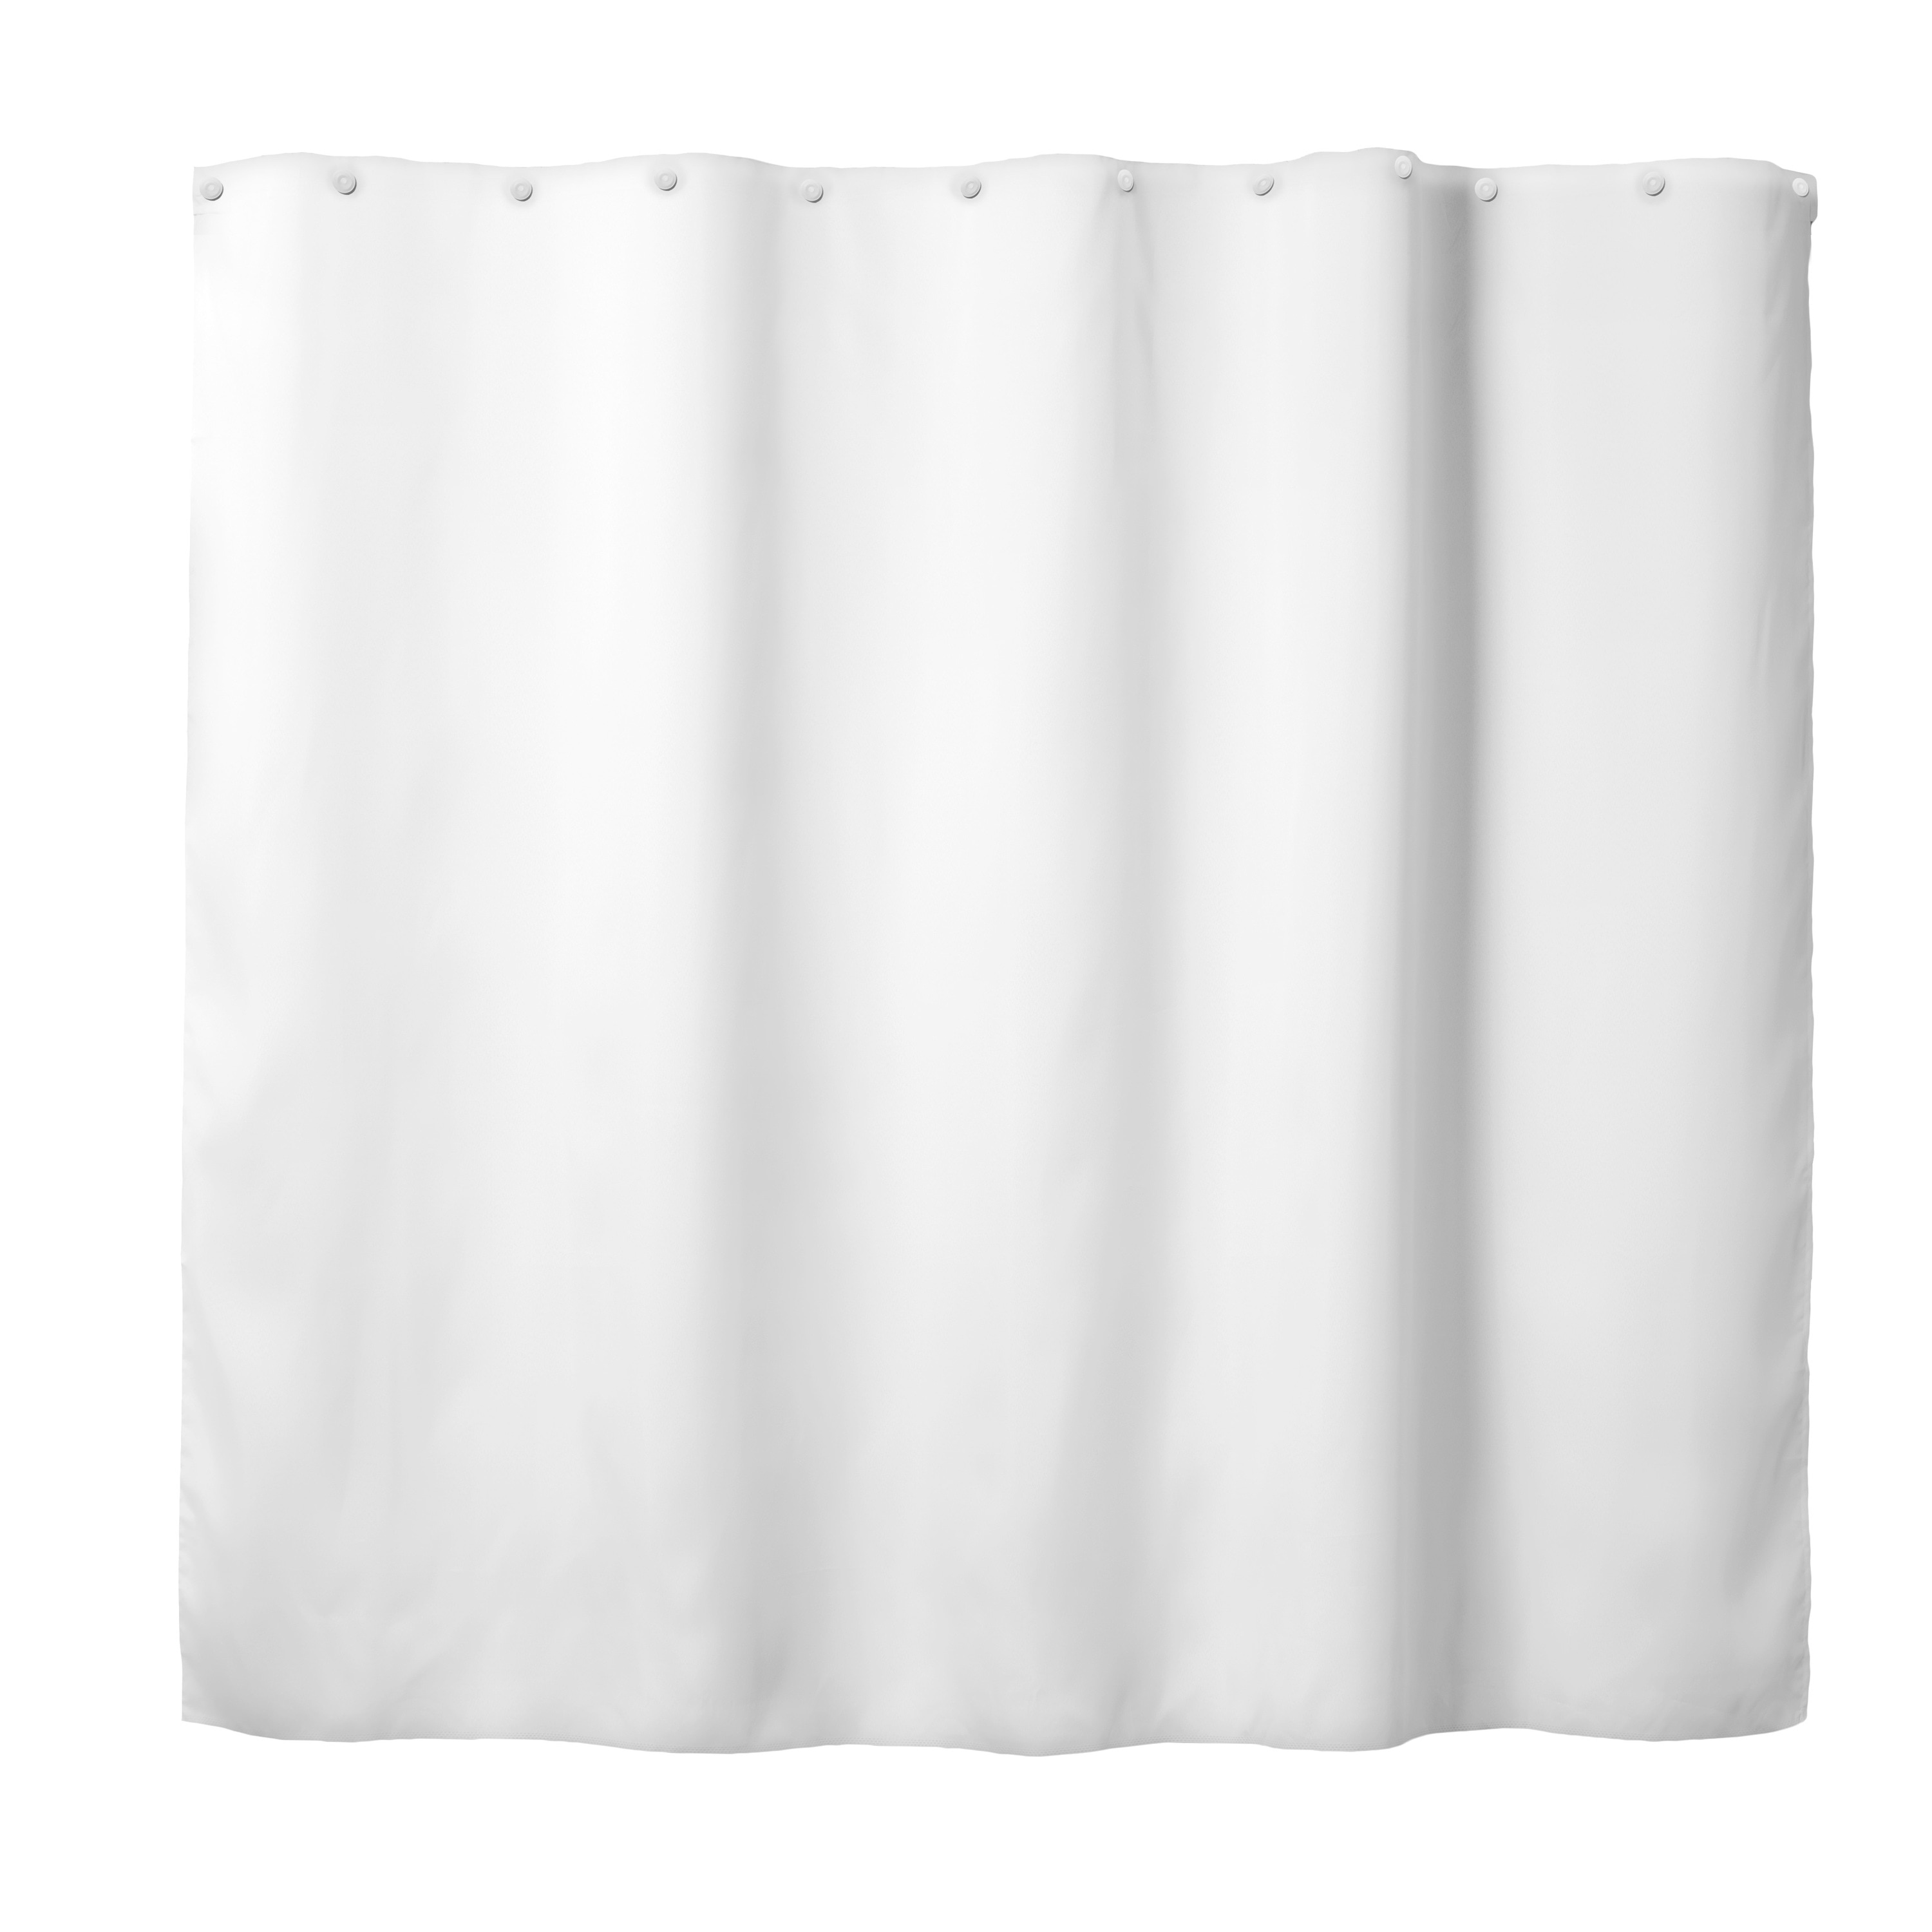 Hookless Peva Replacement Liner - On Sale - Bed Bath & Beyond - 38205320